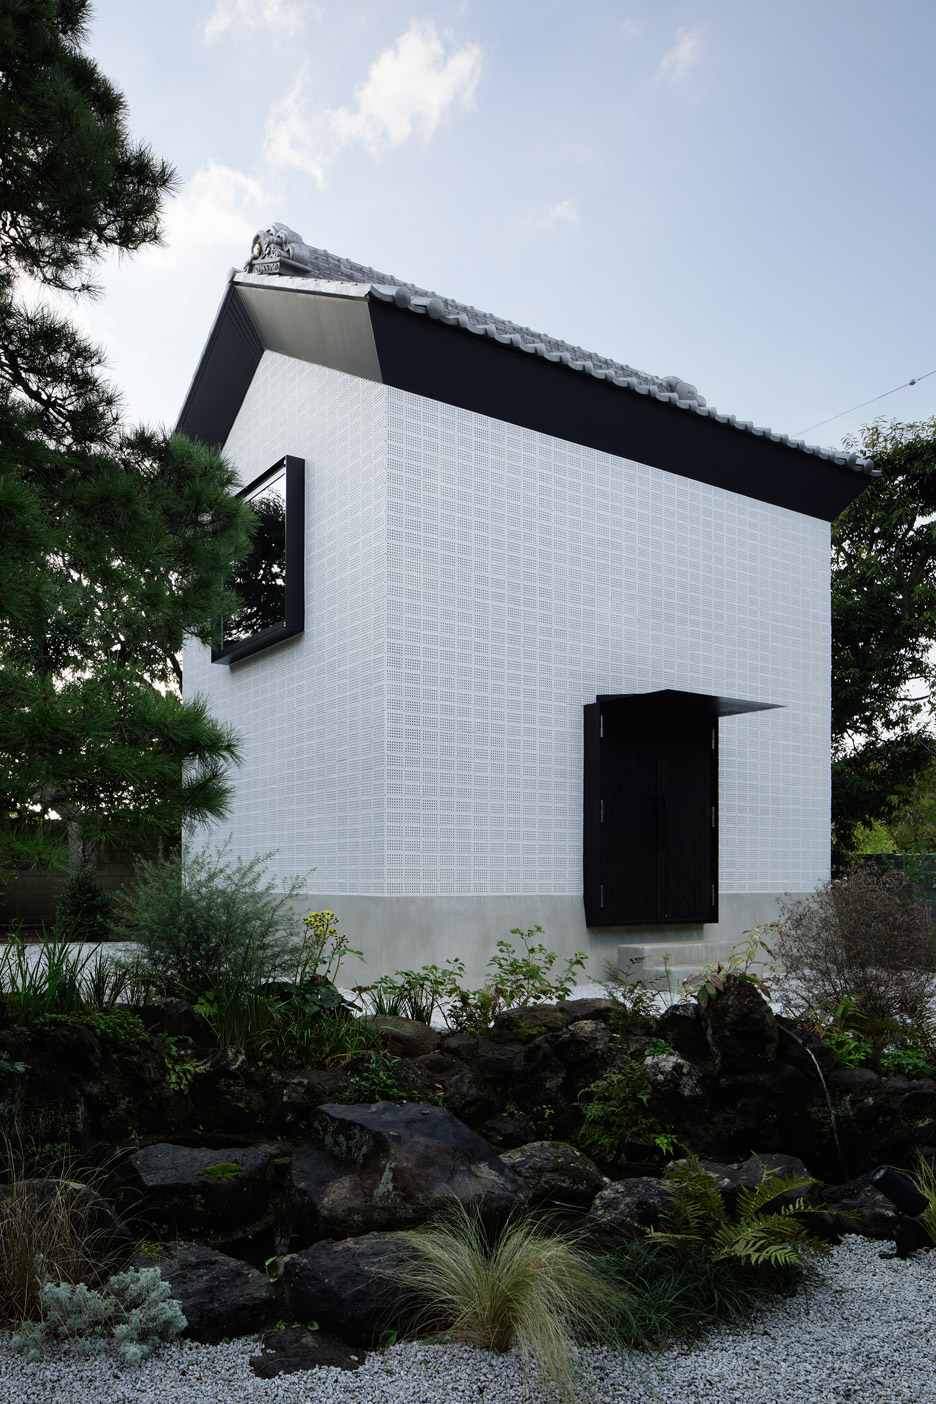 Earthquake-damaged Storehouse In Japan Transformed Into Living Space By Ryo Matsui